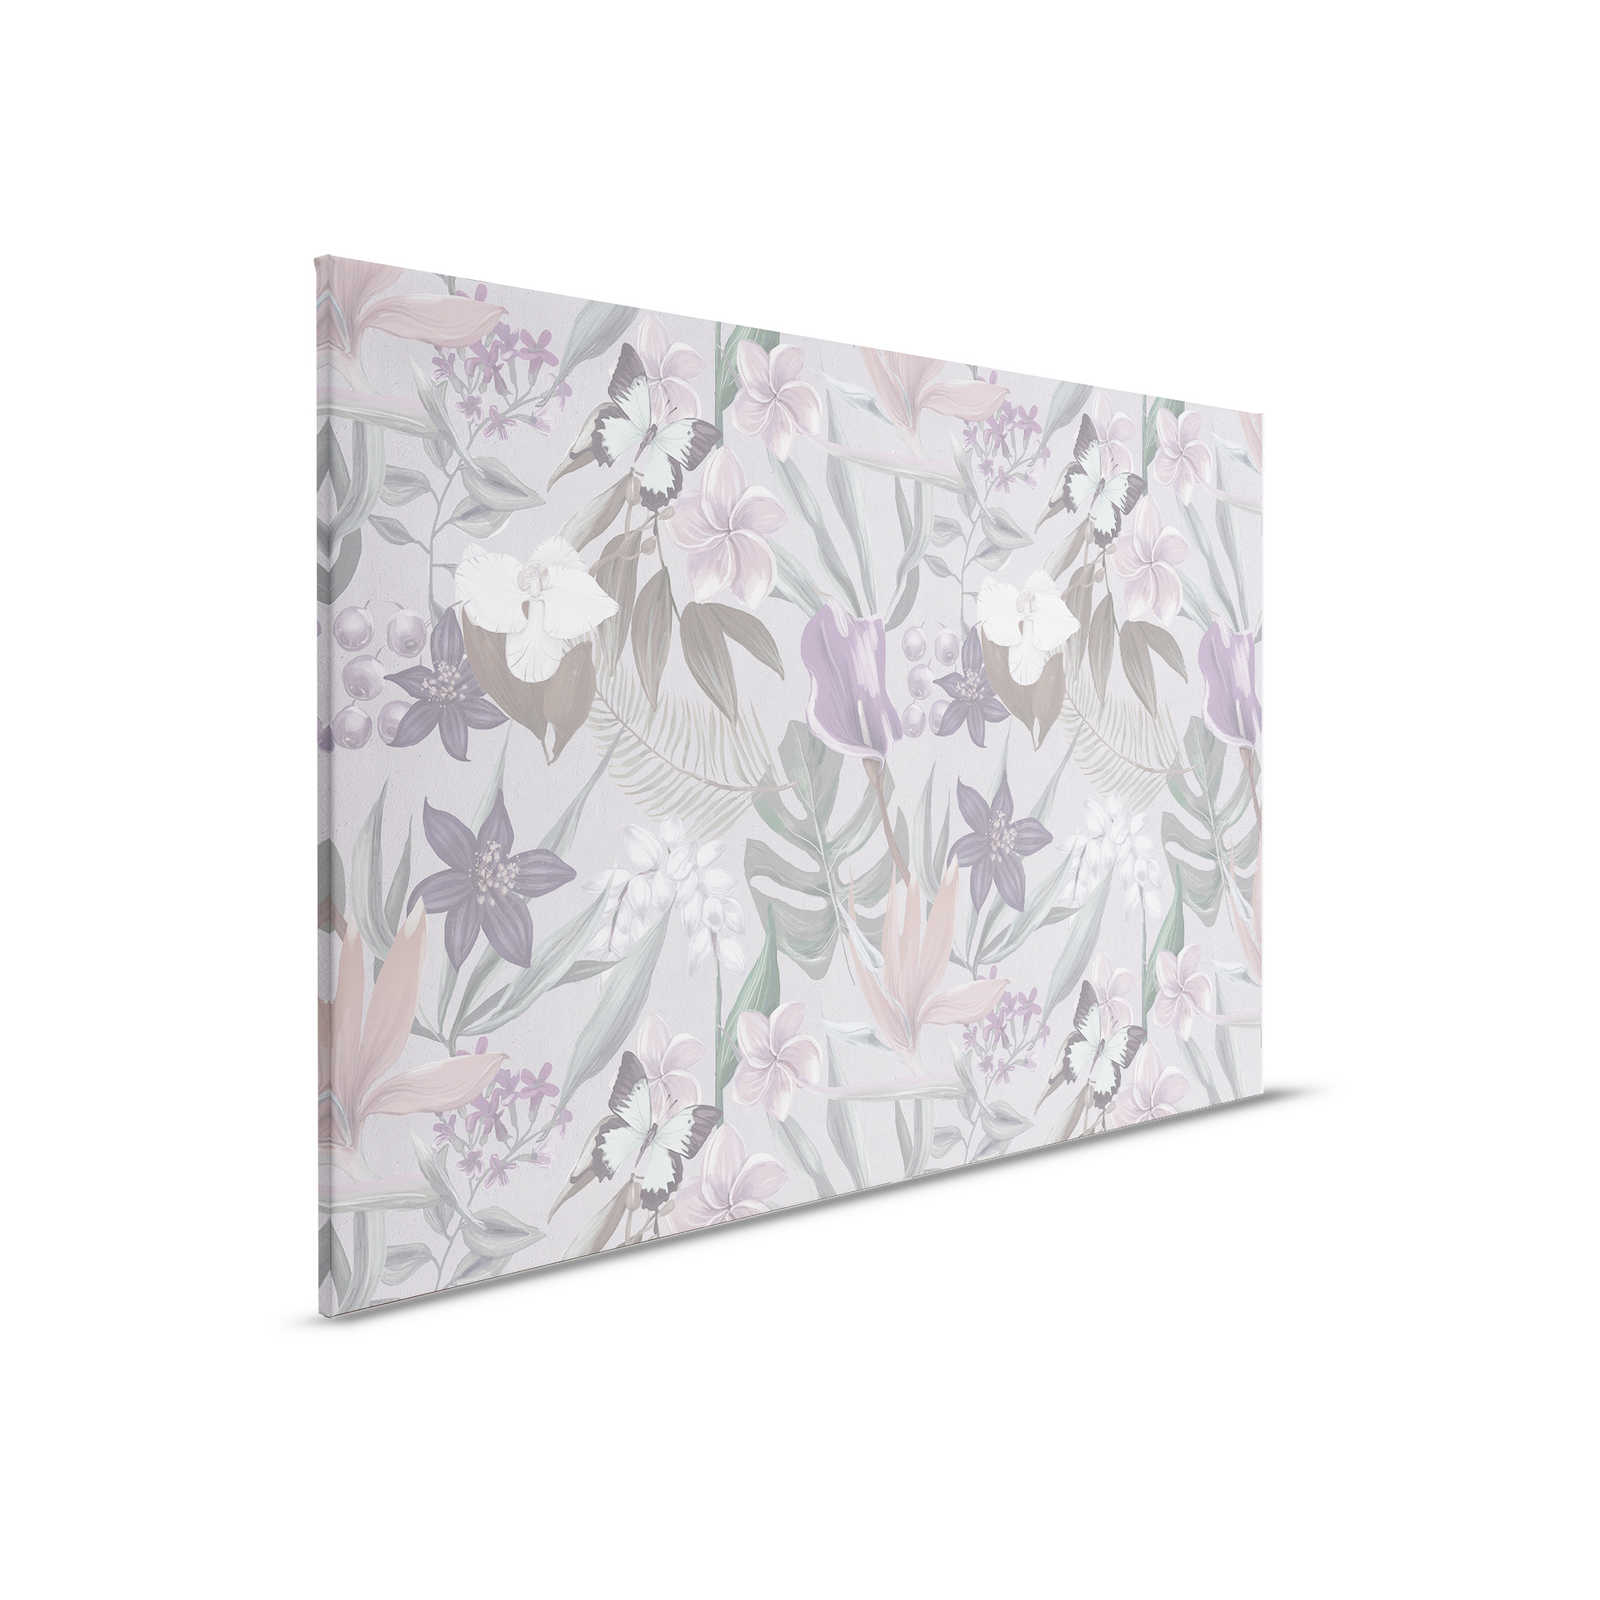 Floral Jungle Canvas Painting drawn | pink, white - 0.90 m x 0.60 m
